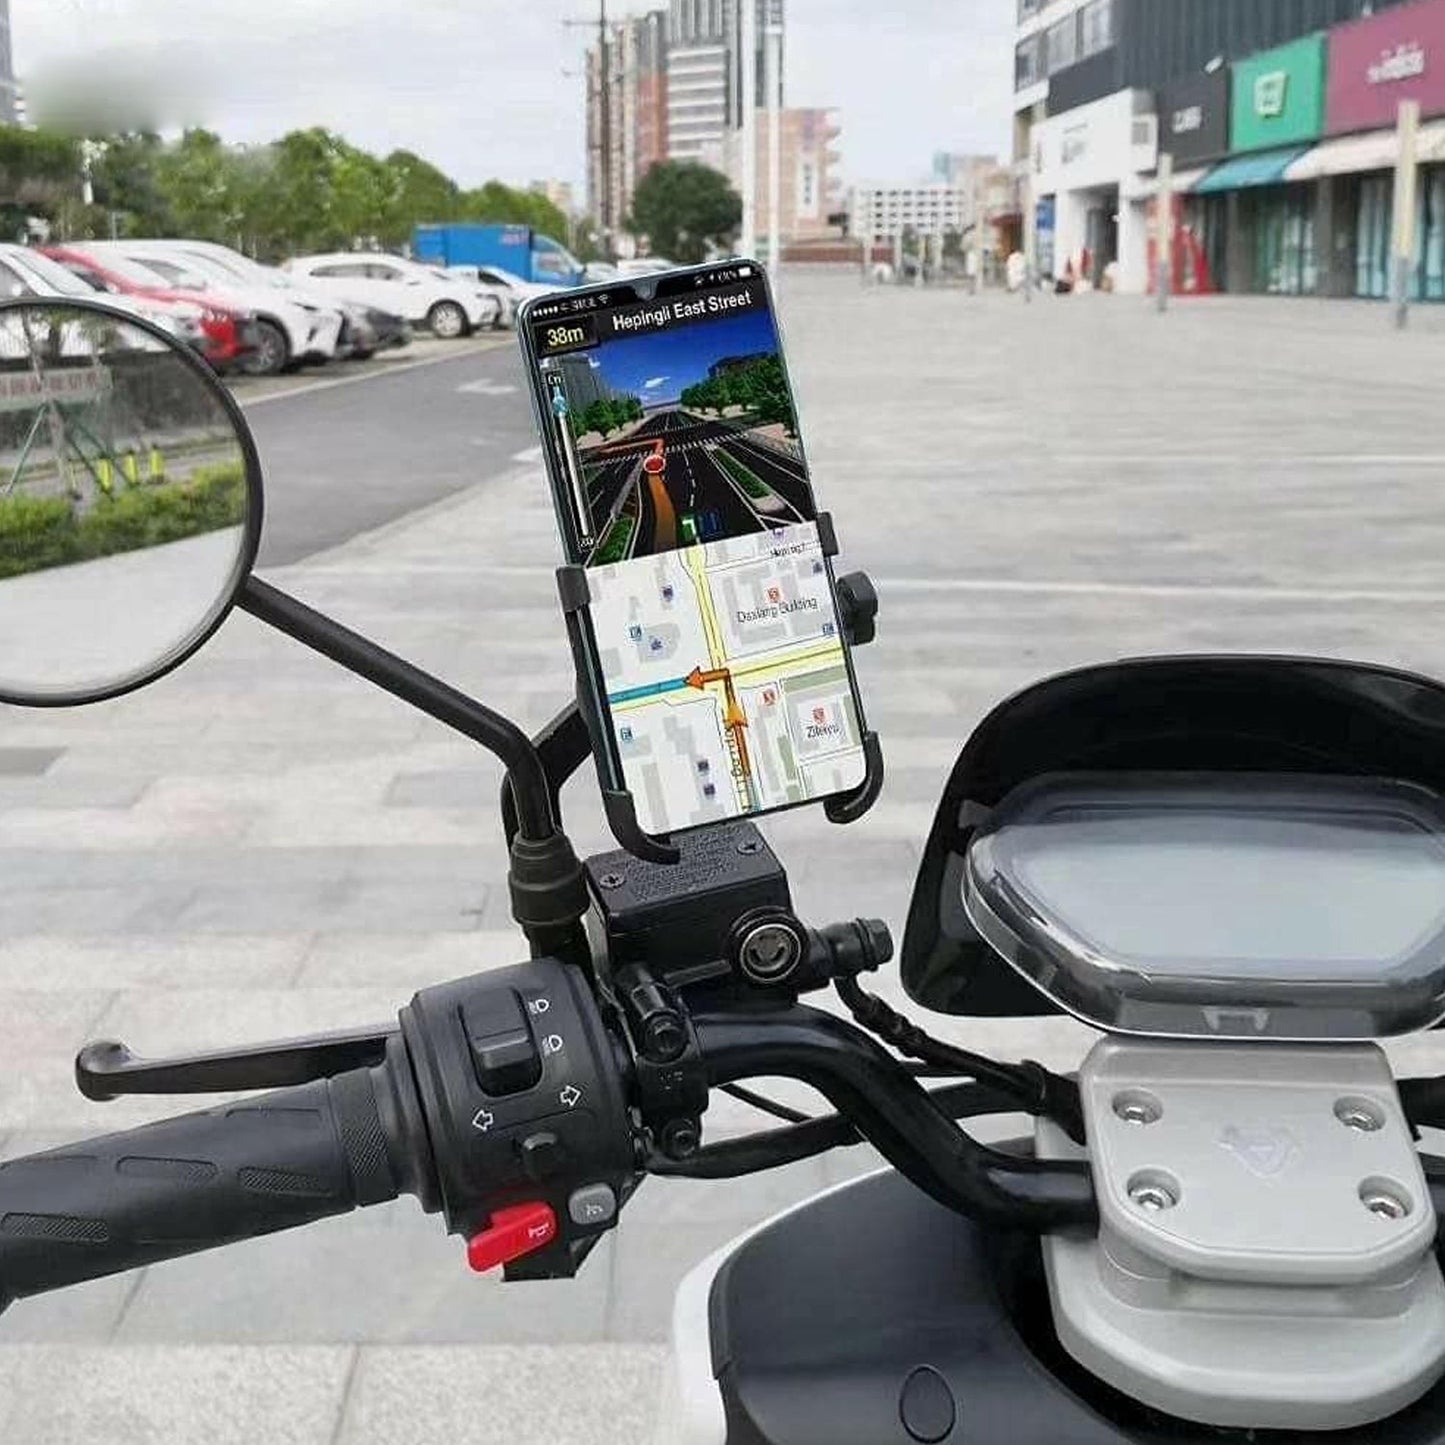 6706 Mobile Phone Holder With Easy Adjustable Rear View Mirror Mount Solid Metal Cradle Stand Suitable for Bike & Mobile Phones 